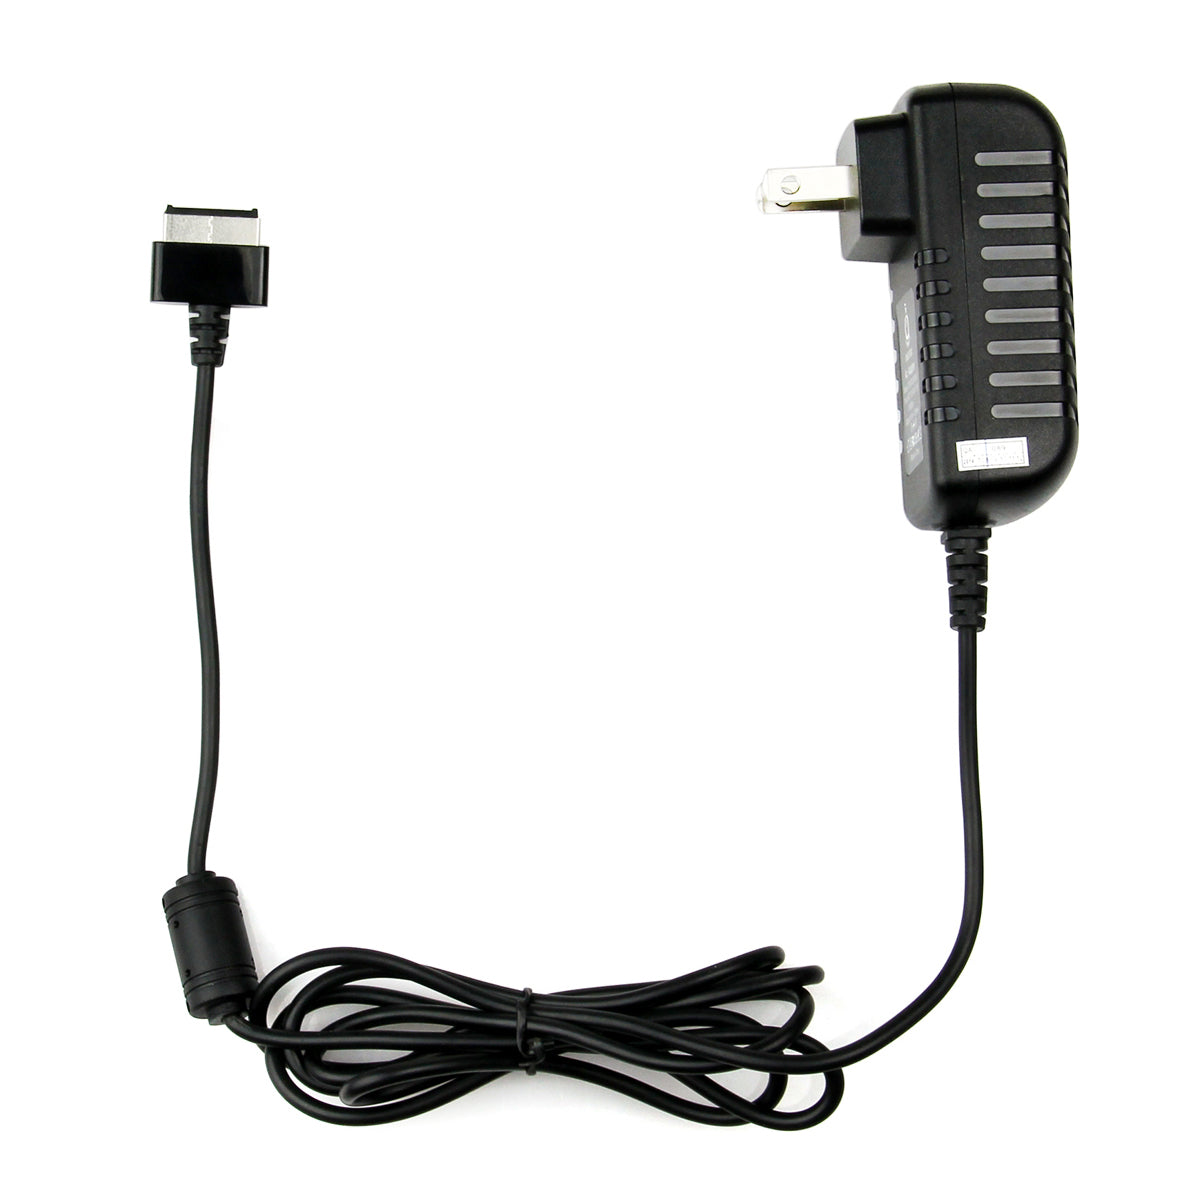 AC Adapter Charger for ASUS TF201 A2 Eee Pad.